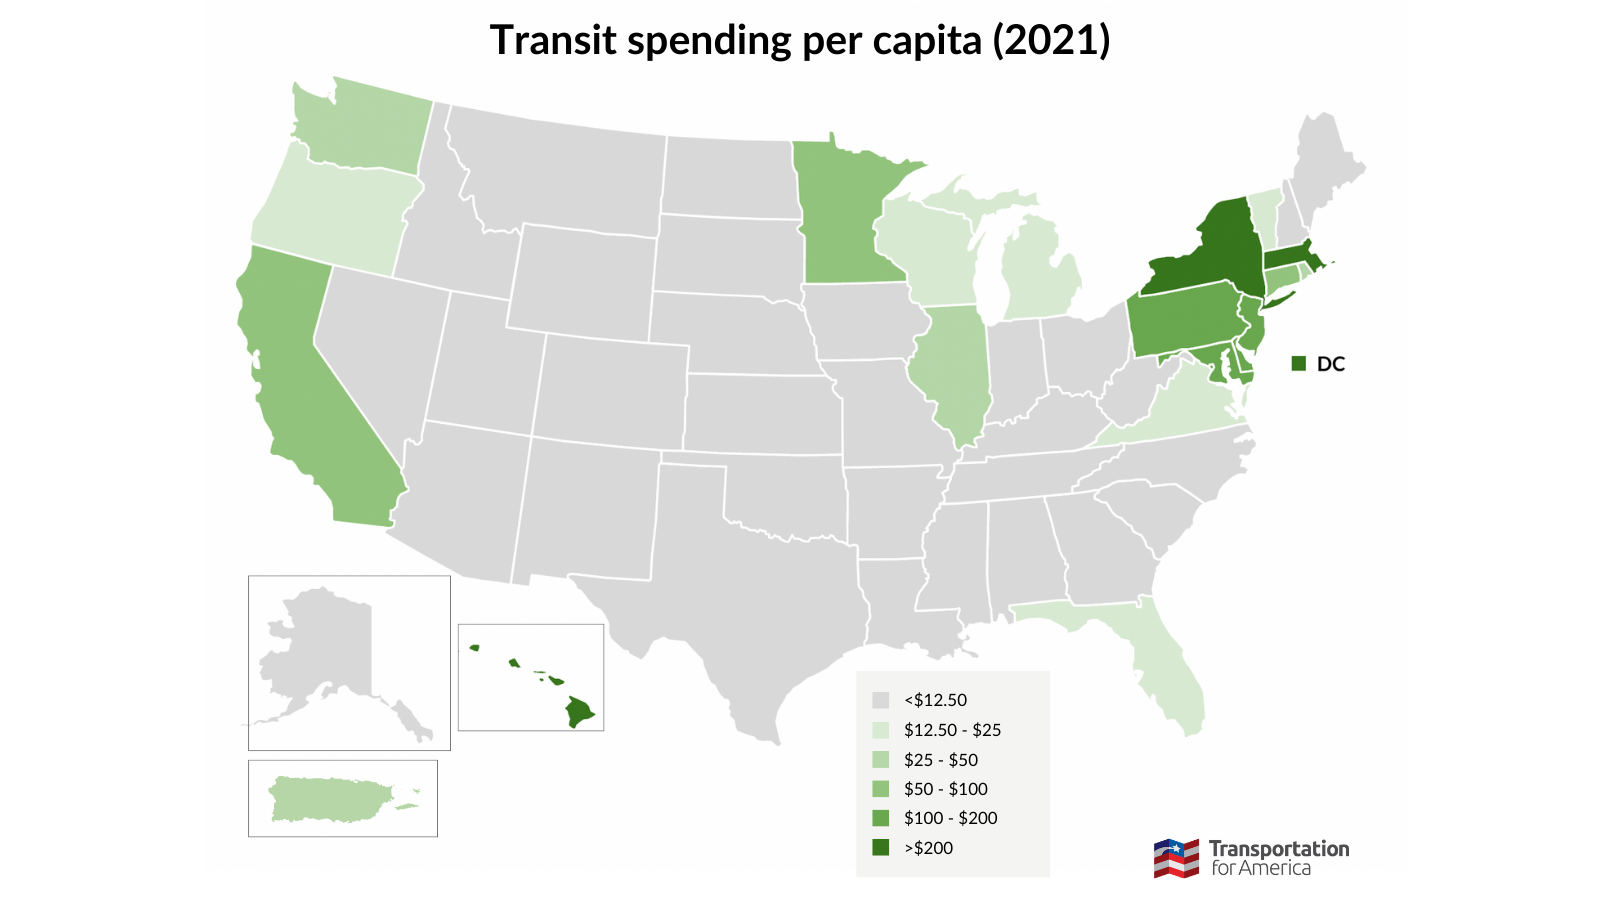 Map of state transit spending. For more information, see the text under "Transit spending." A table showing each state's spending will be available in our upcoming report, The Transit Report Card.